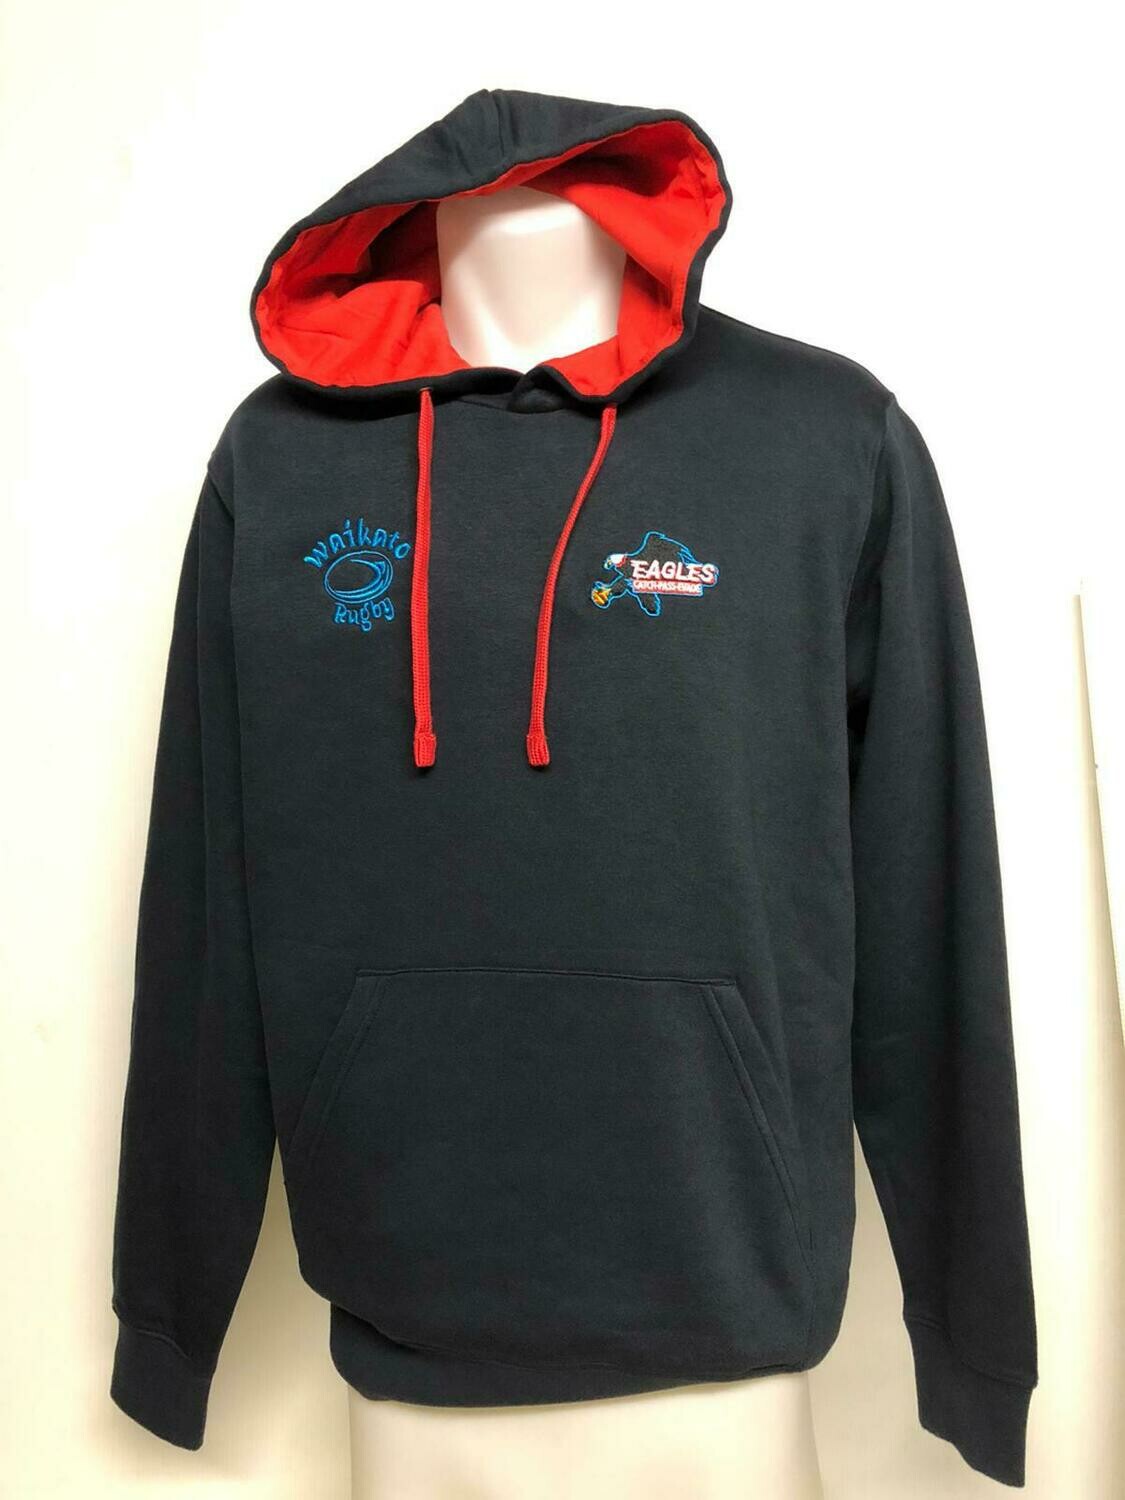 Hoodie - Navy and inside red